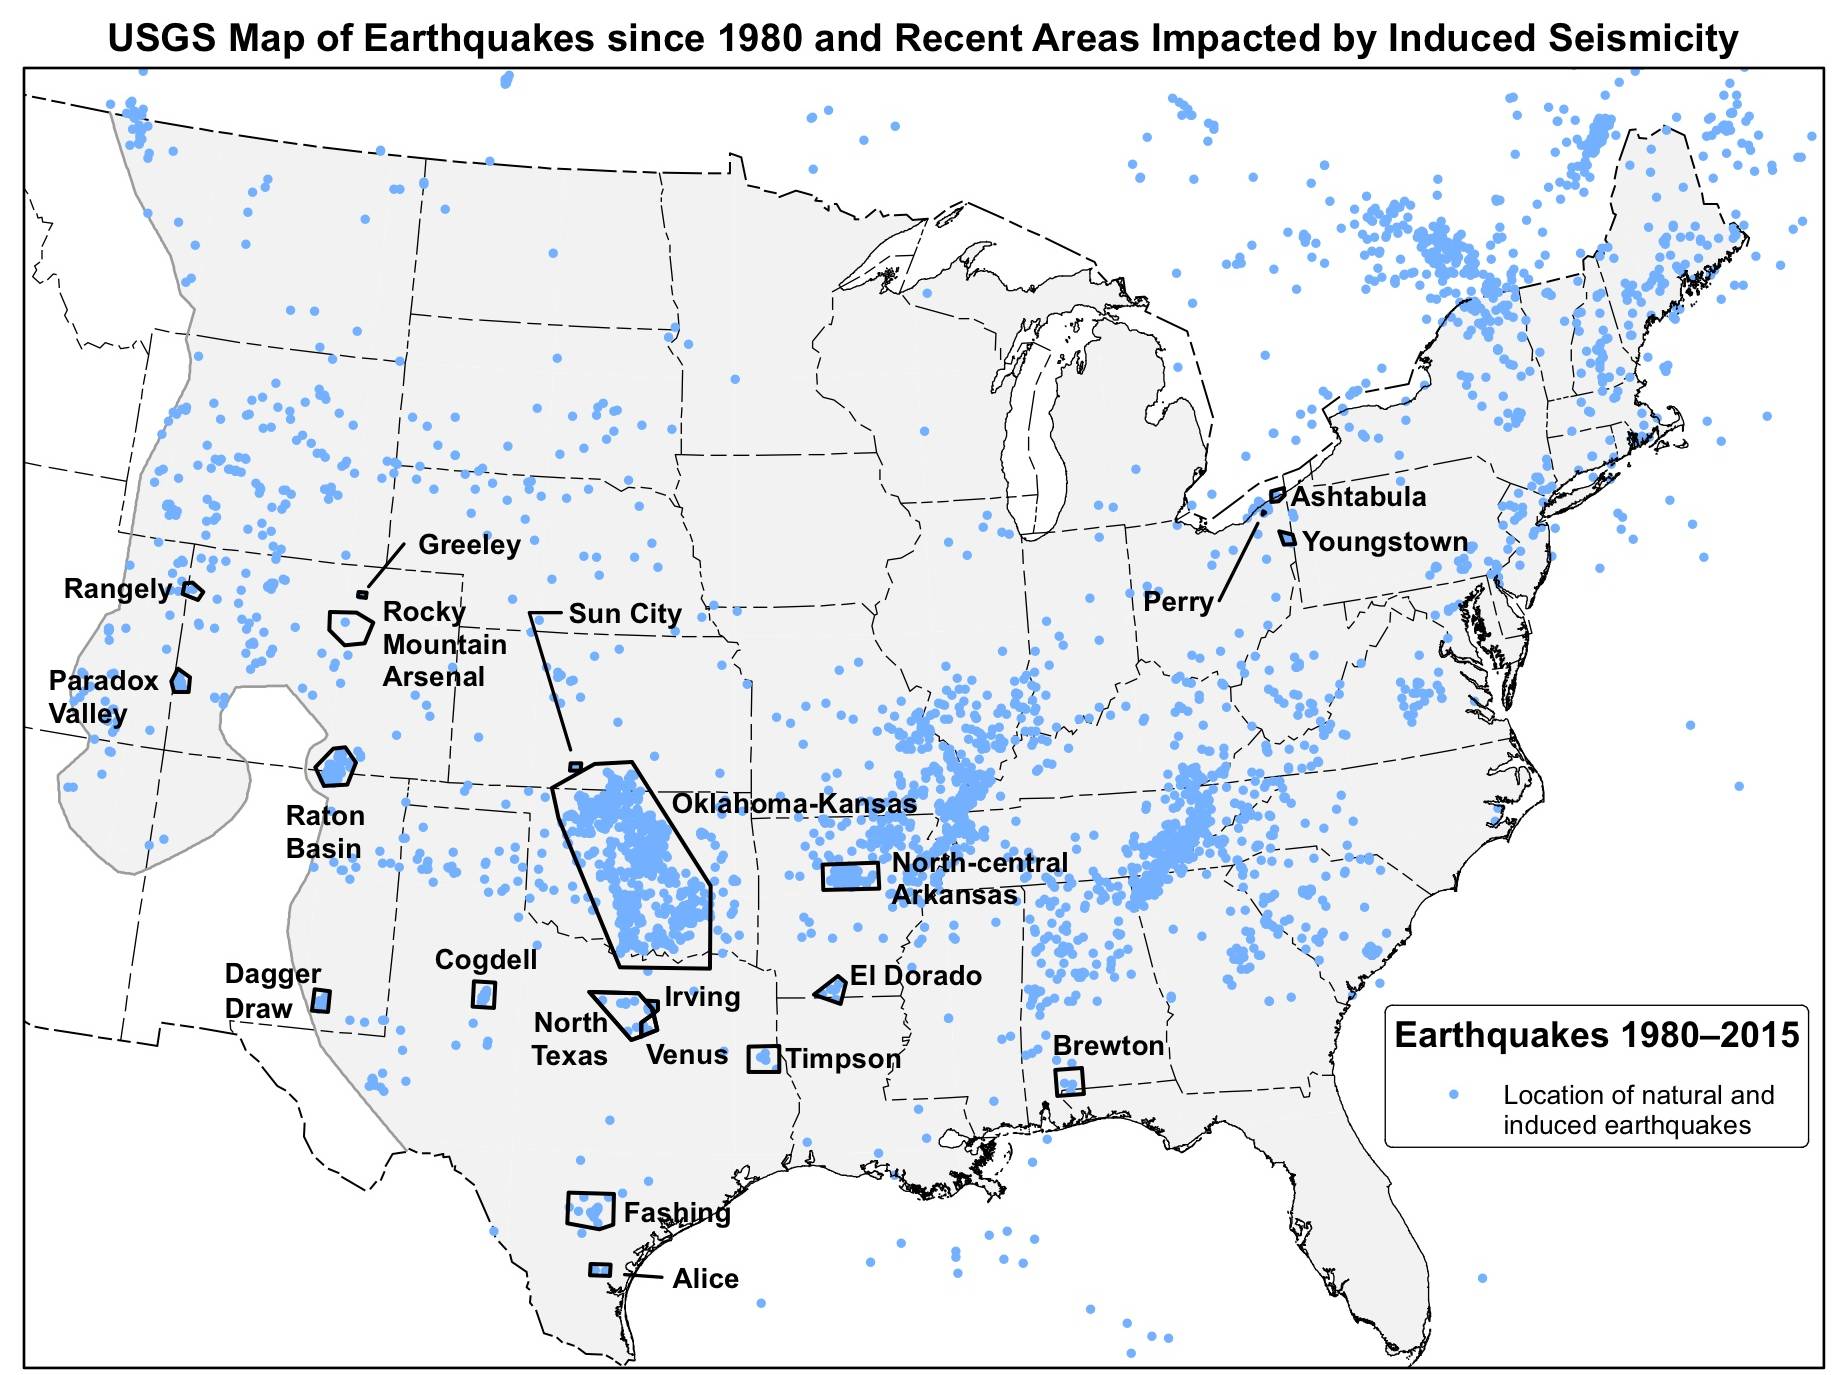 USGS map displaying 21 areas where scientists have observed rapid changes in seismicity that are associated with wastewater injection. The map also shows natural and induced earthquakes with a magnitude greater than or equal to 2.5.